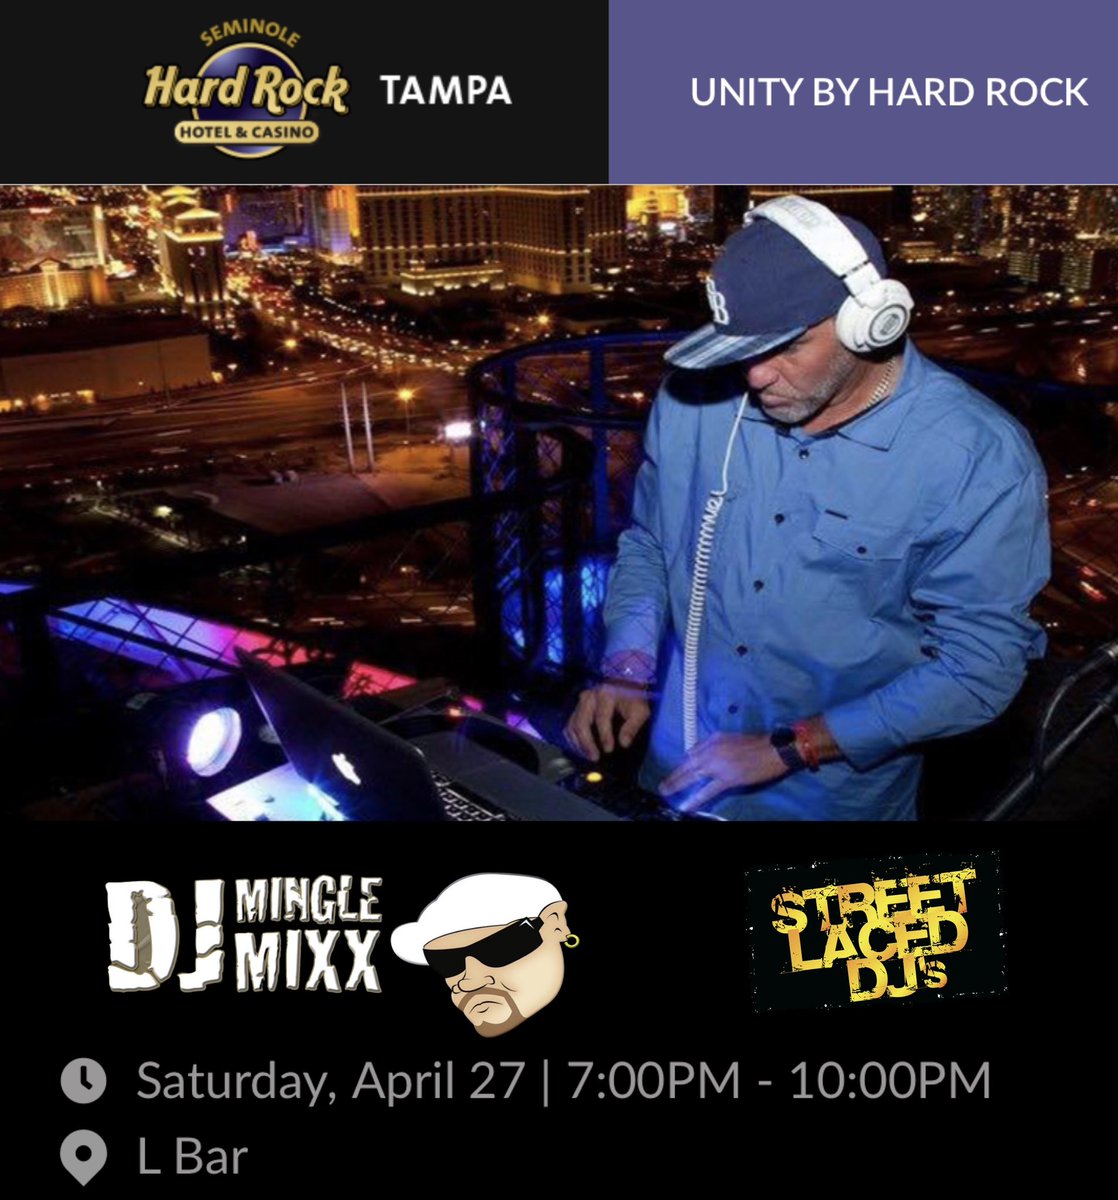 Hey Hey, @CityofTampa! Plans this weekend? You do NOW! #StreetLacedDJs are rockin’ EVERY weekend at @SHRTampa! Tomorrow night, DJ Lira sets off The L Bar at 10pm, as @MingleMixx takes the party over on Saturday Night, 7pm at The L Bar! 
Come rock with us! #WeDontPlayWeJustWin